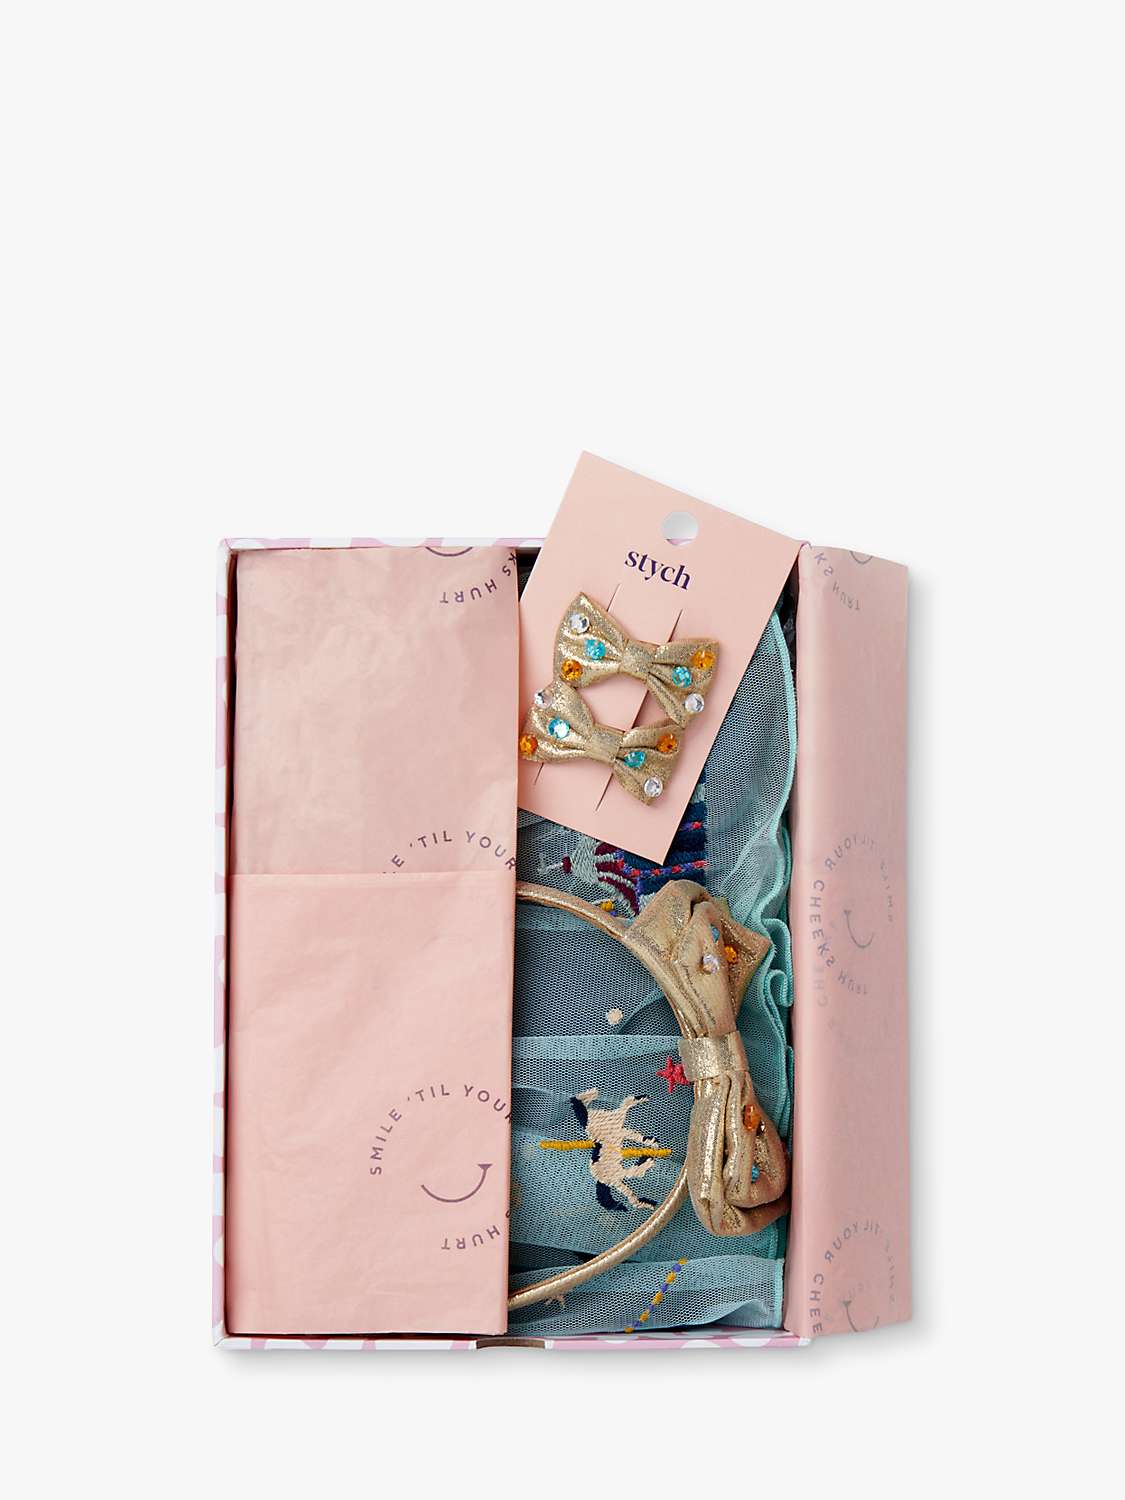 Buy Stych Kids' Once Upon A Time Dress Up Gift Box, Blue/Teal Online at johnlewis.com